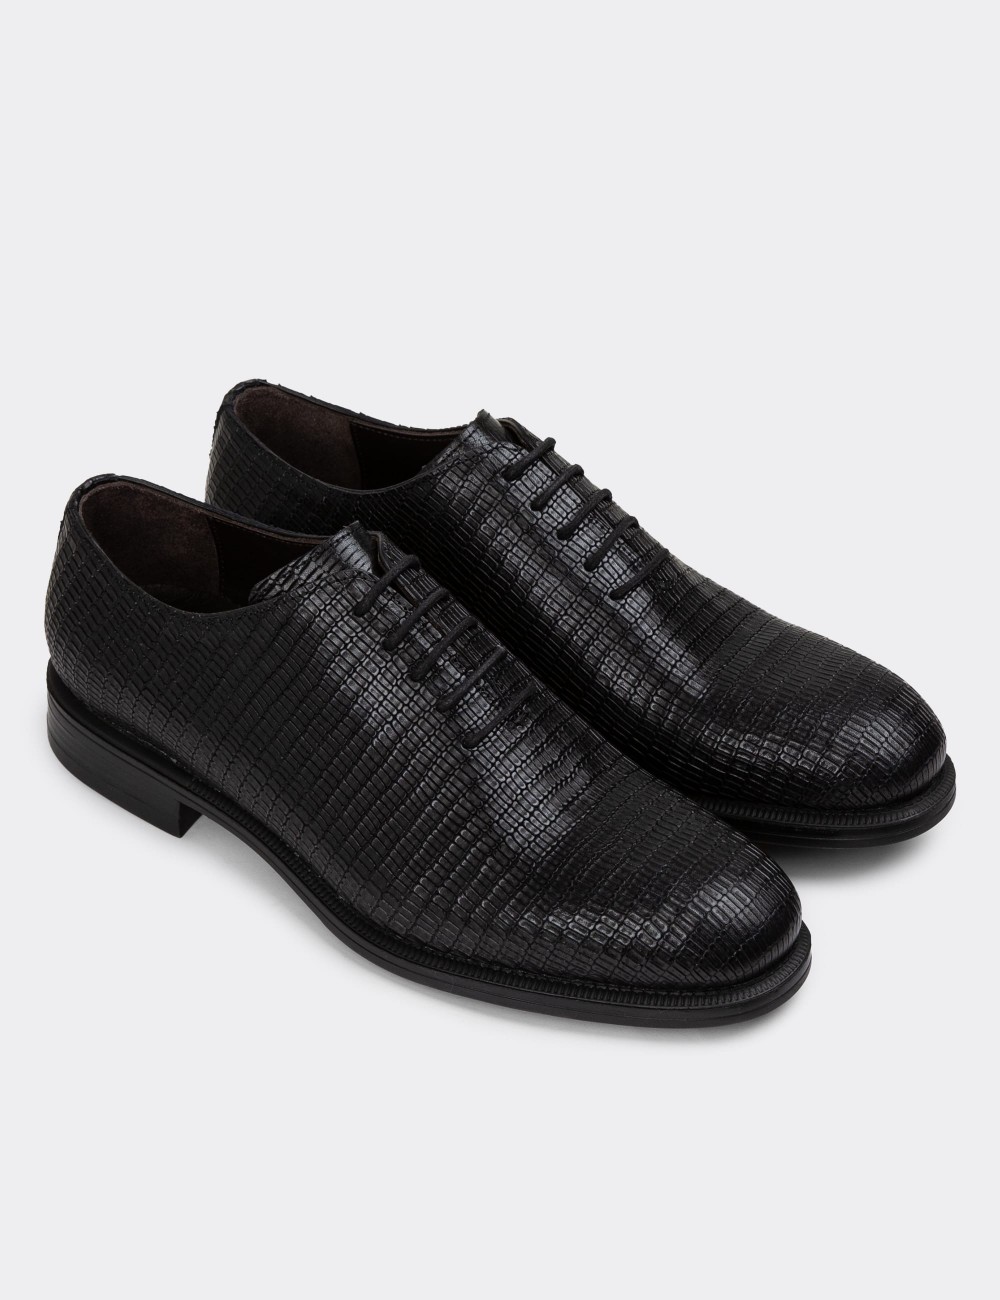 Black Leather Classic Shoes - 01830MSYHC06